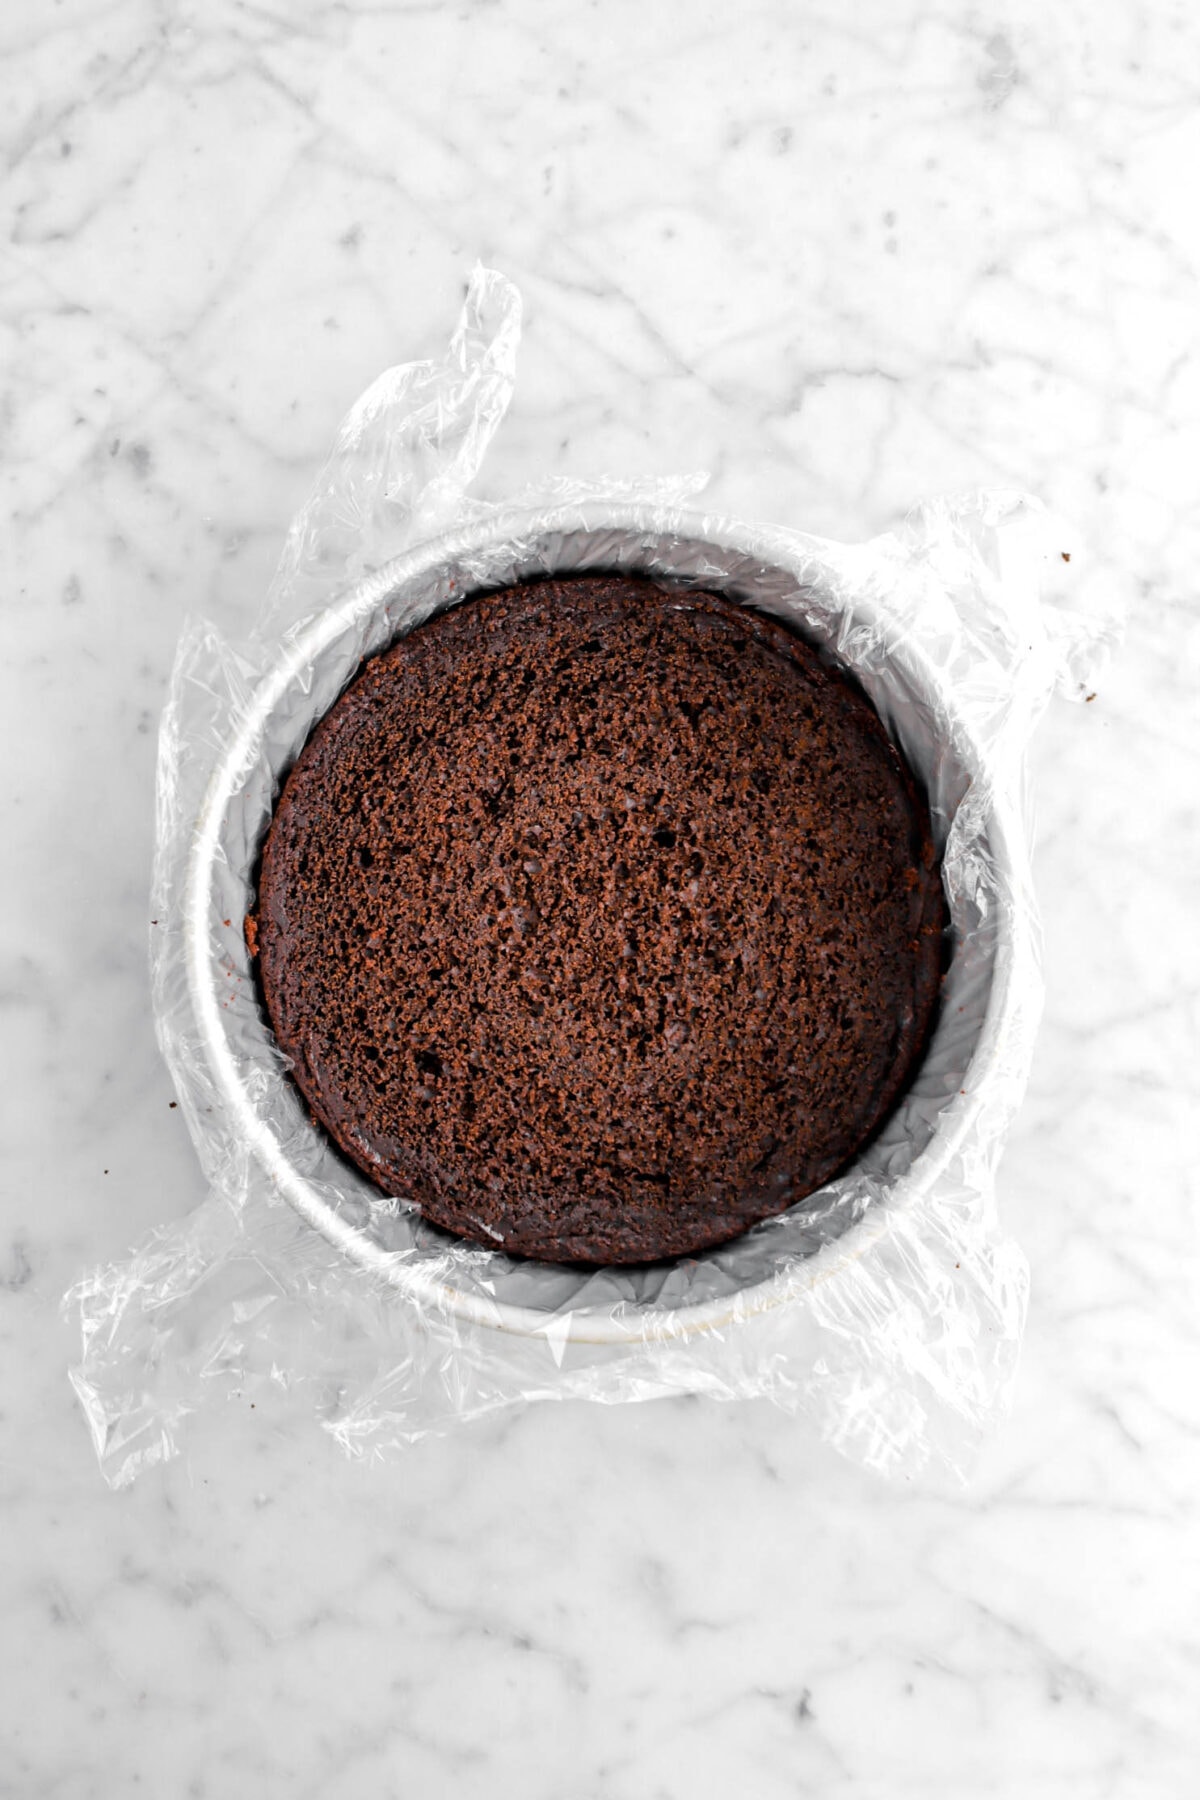 leveled chocolate cake in plastic wrap lined cake pan.